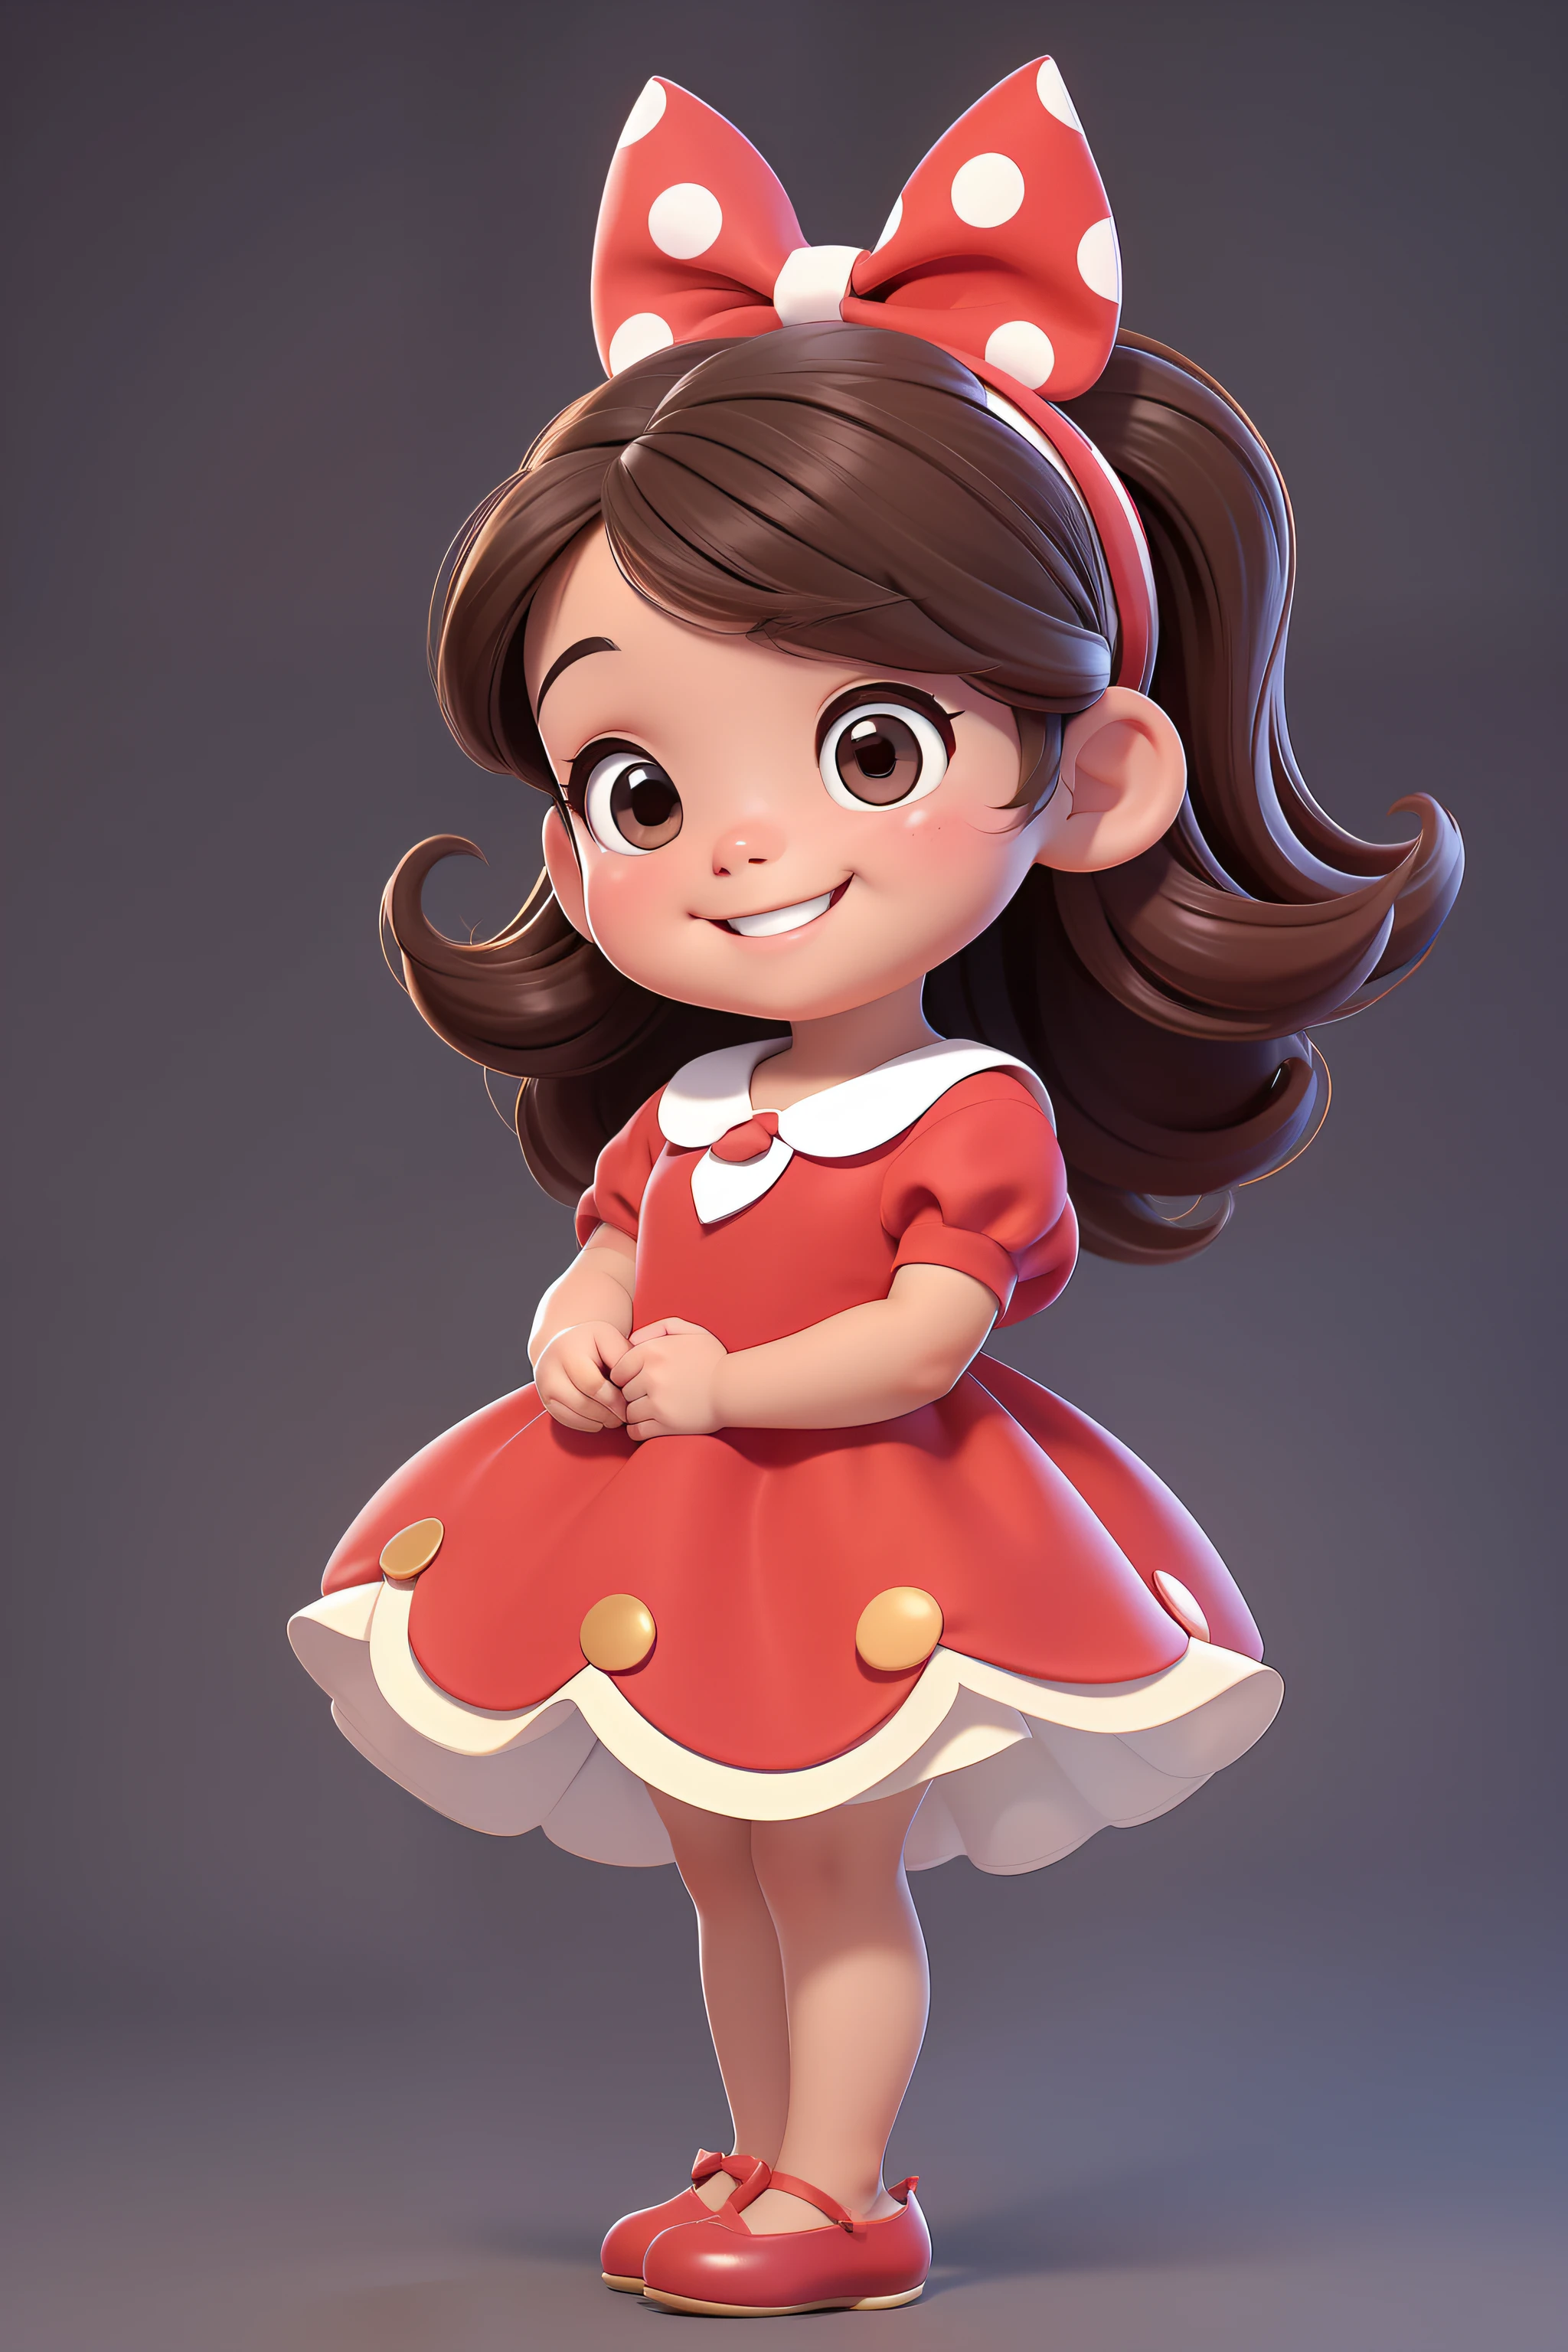 [(An adorable smiling brunette girl :1.2)(Small and cuddly baby)(pele clara)(Feliz)][(vestindo fantasia inspirada no 'Minnie') , childrens illustration , fundo limpo], wearing a little red dress with white polka dots and a bow in her hair, corpo inteiro, usando um sapatinho preto